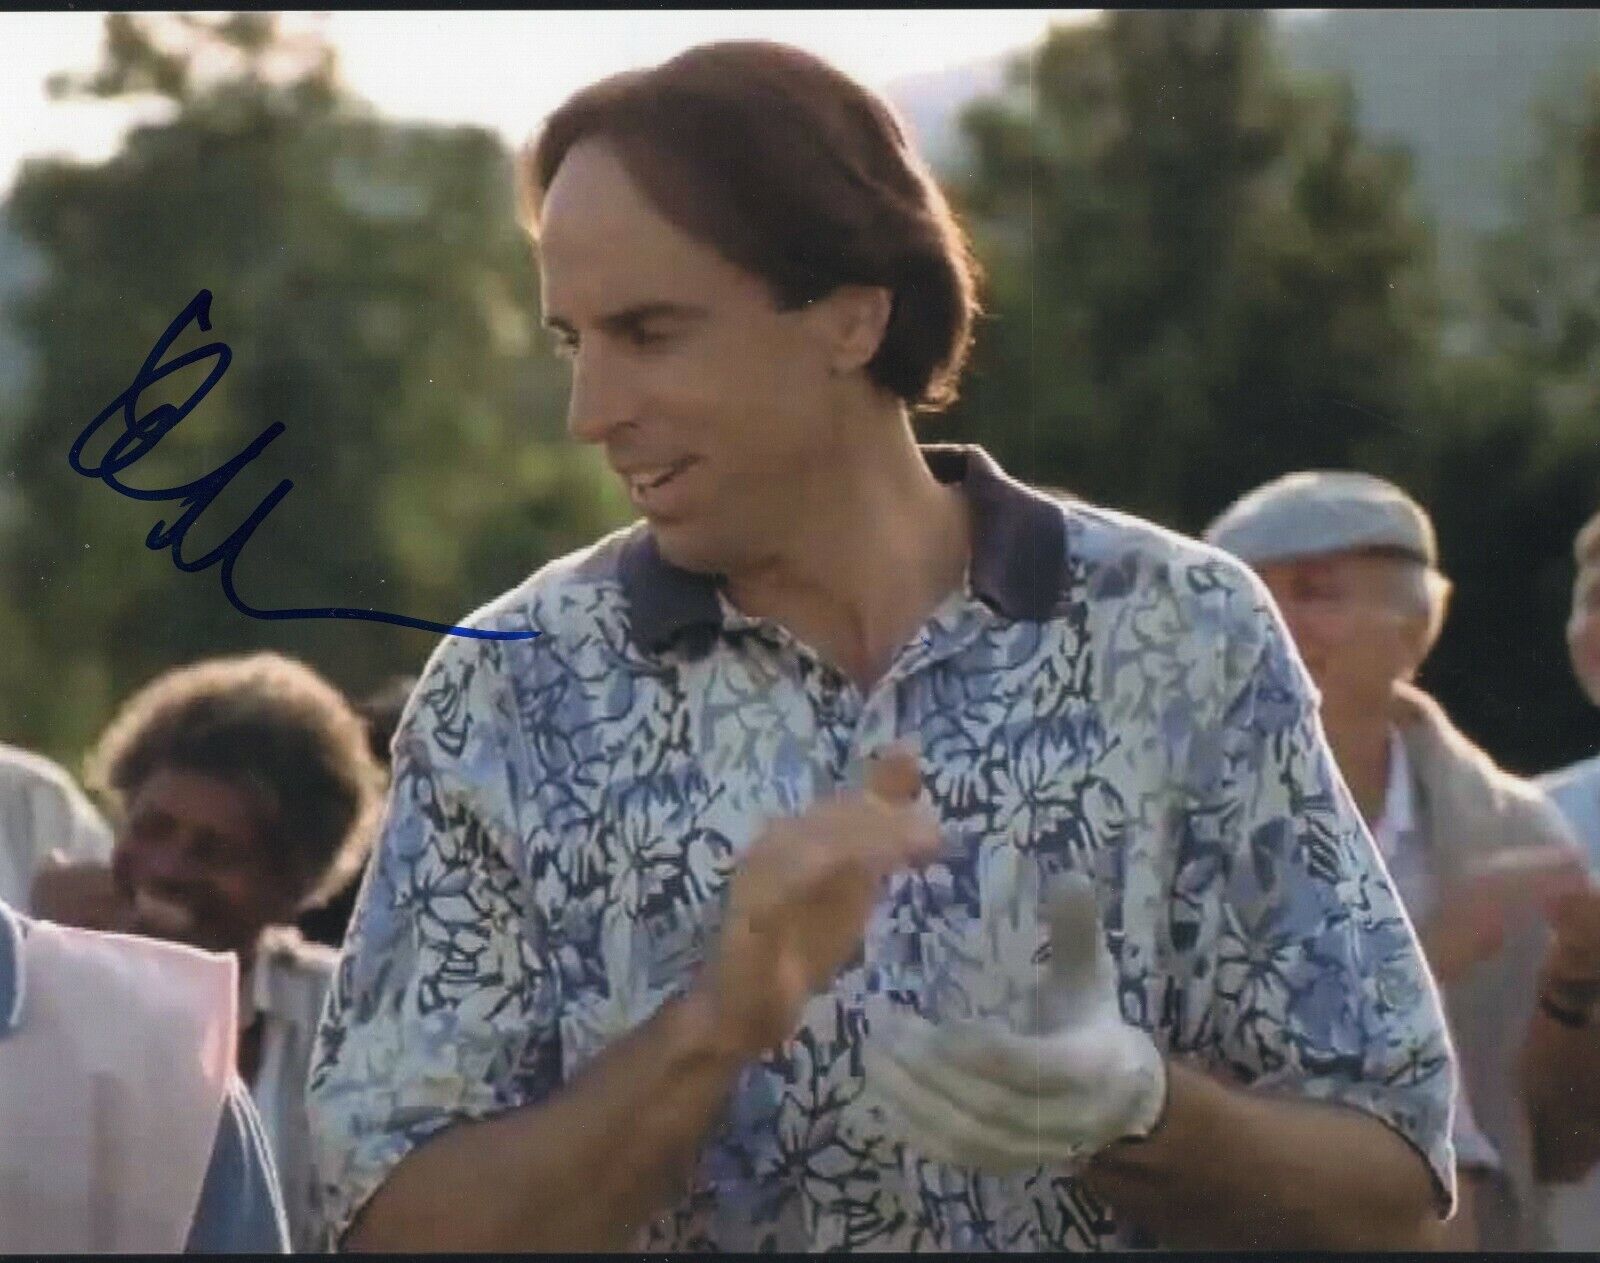 Kevin Nealon Signed 8x10 Photo Poster painting w/COA Comedian Actor Saturday Night Live Weeds #2